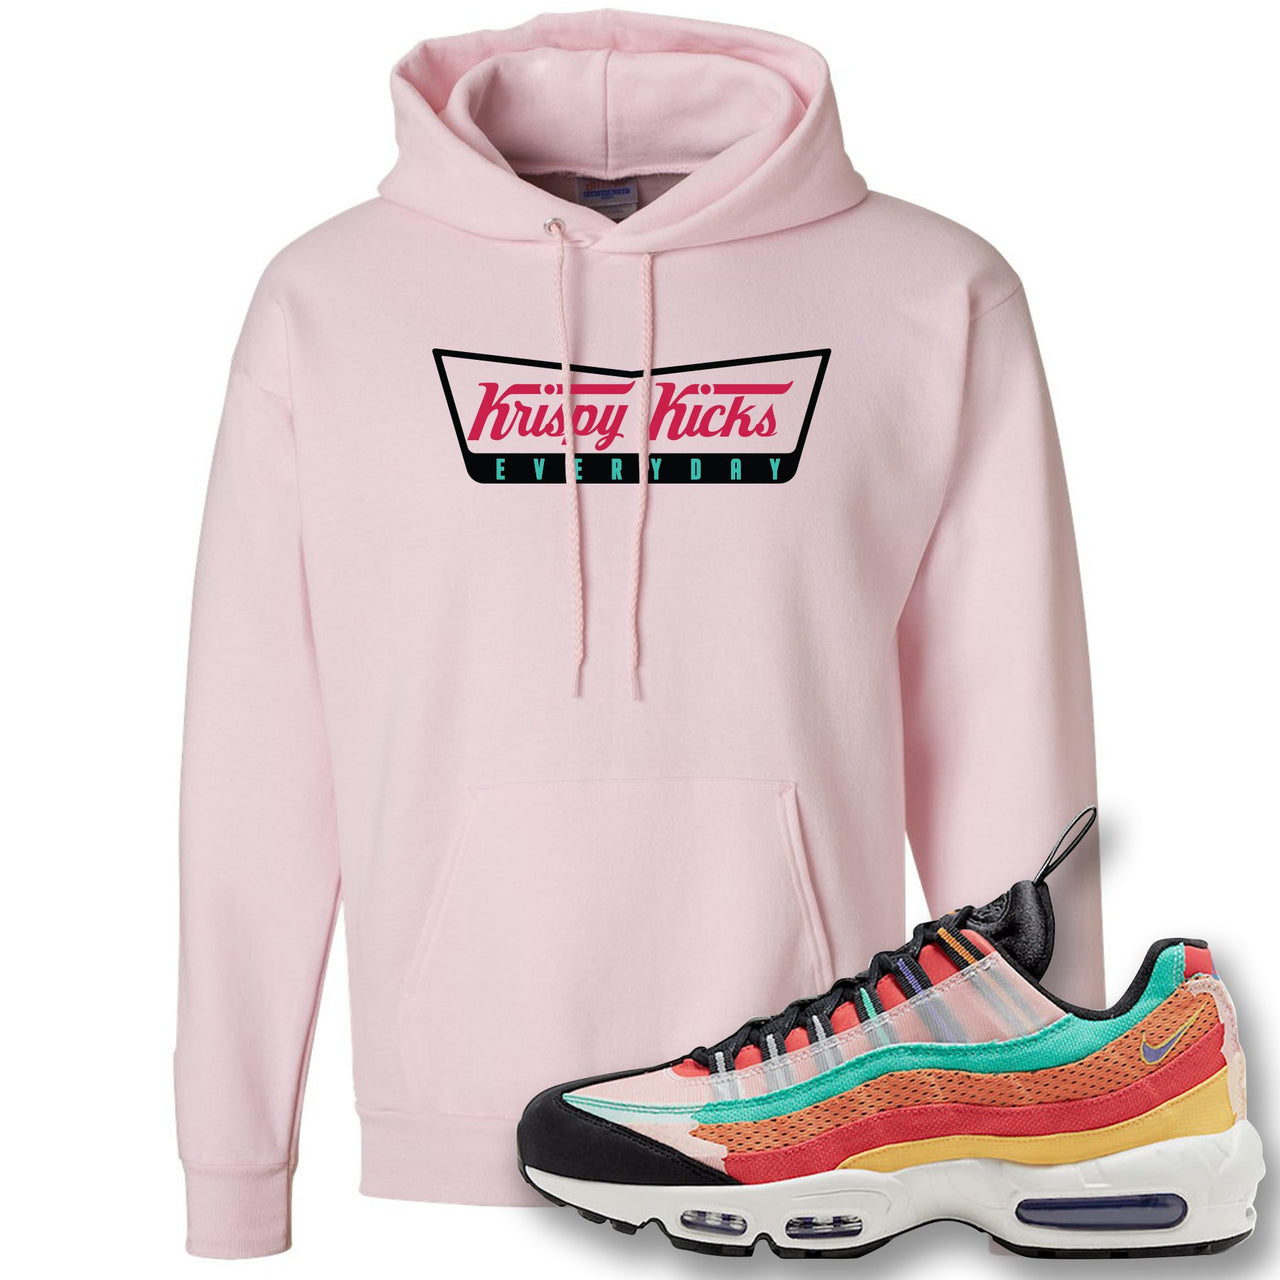 Air Max 95 Black History Month Sneaker Classic Pink Pullover Hoodie | Hoodie to match Nike Air Max 95 Black History Month Shoes | Krispy Kicks